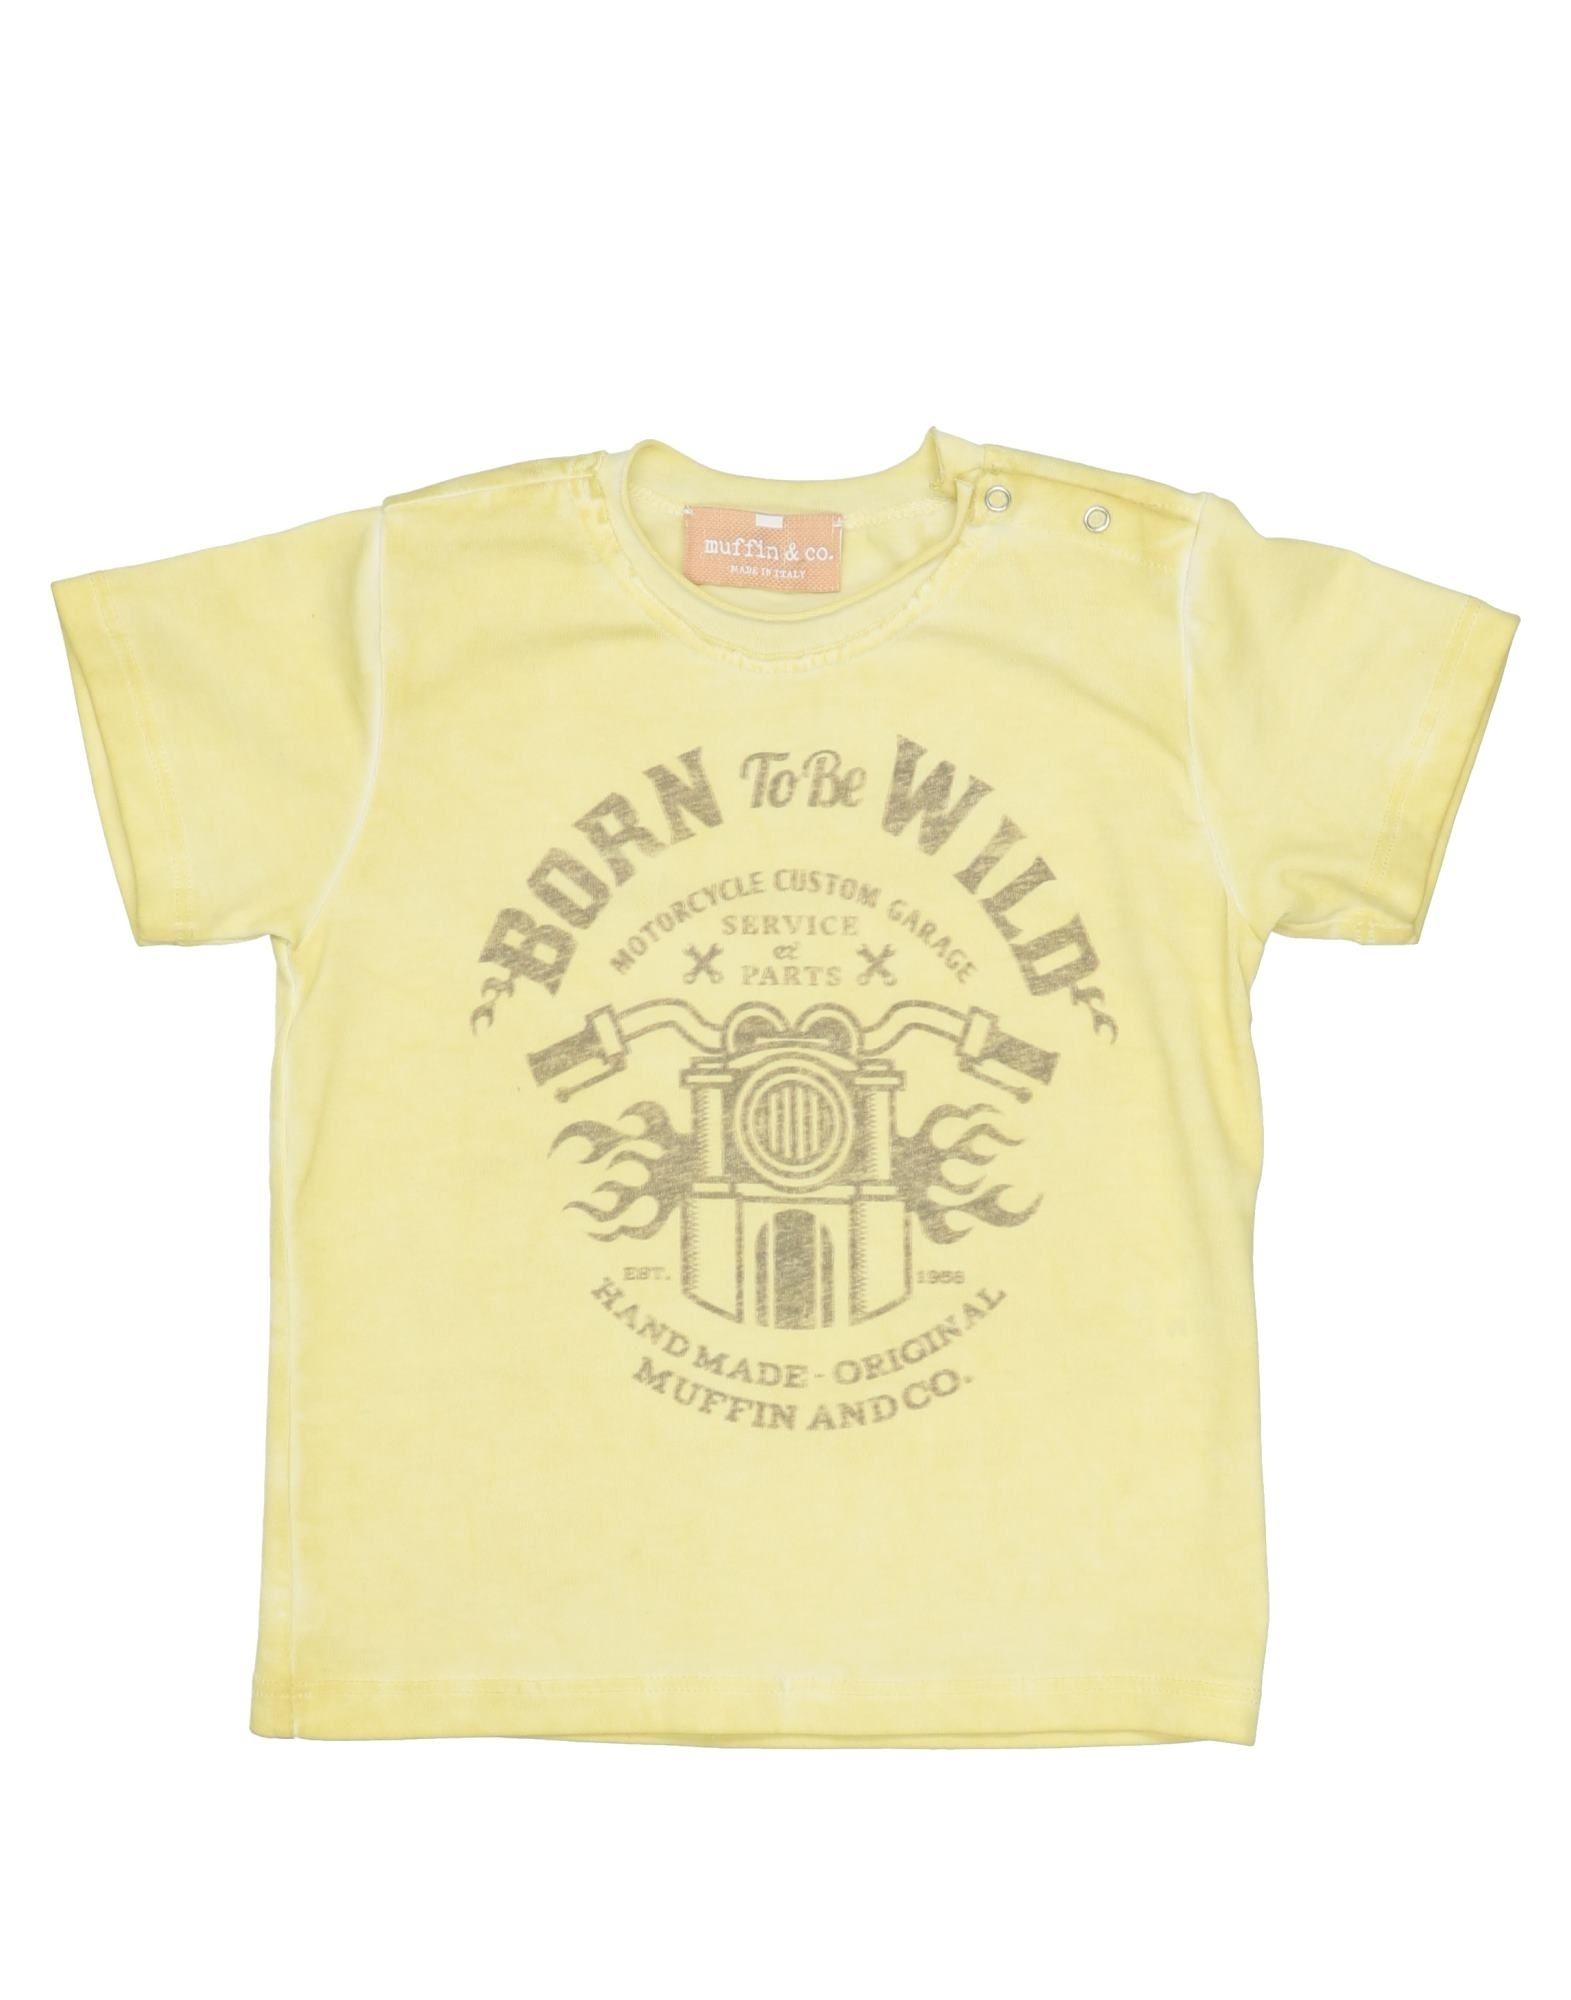 Muffin & Co. Kids' T-shirts In Yellow